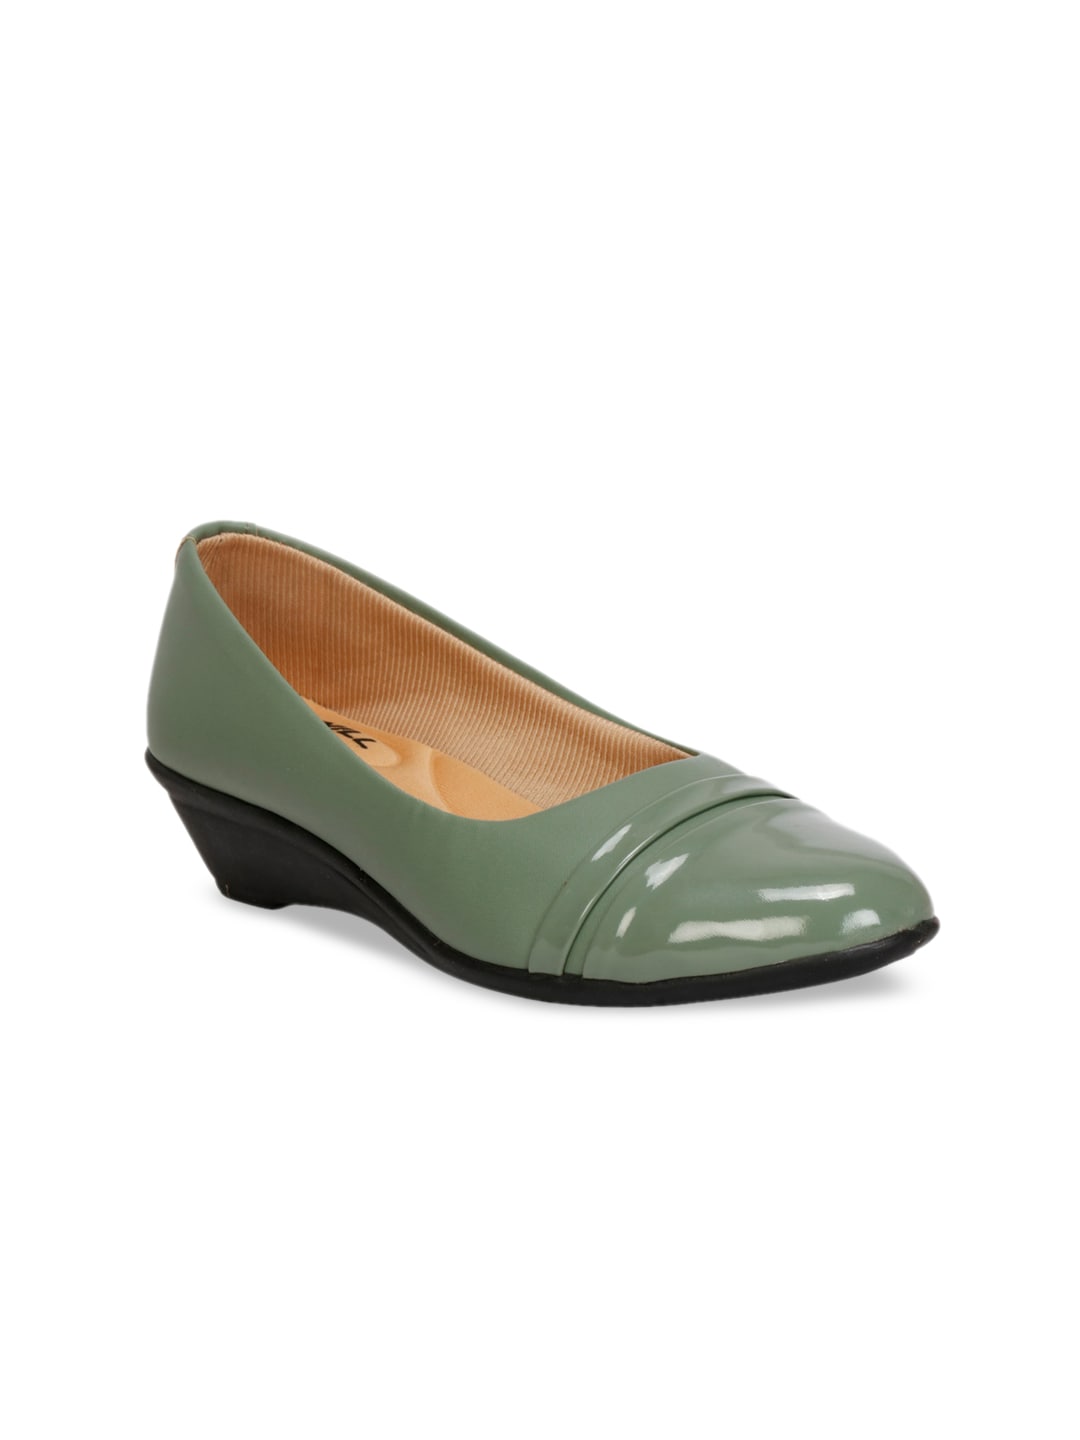 Denill Green Solid Wedge Pumps Price in India